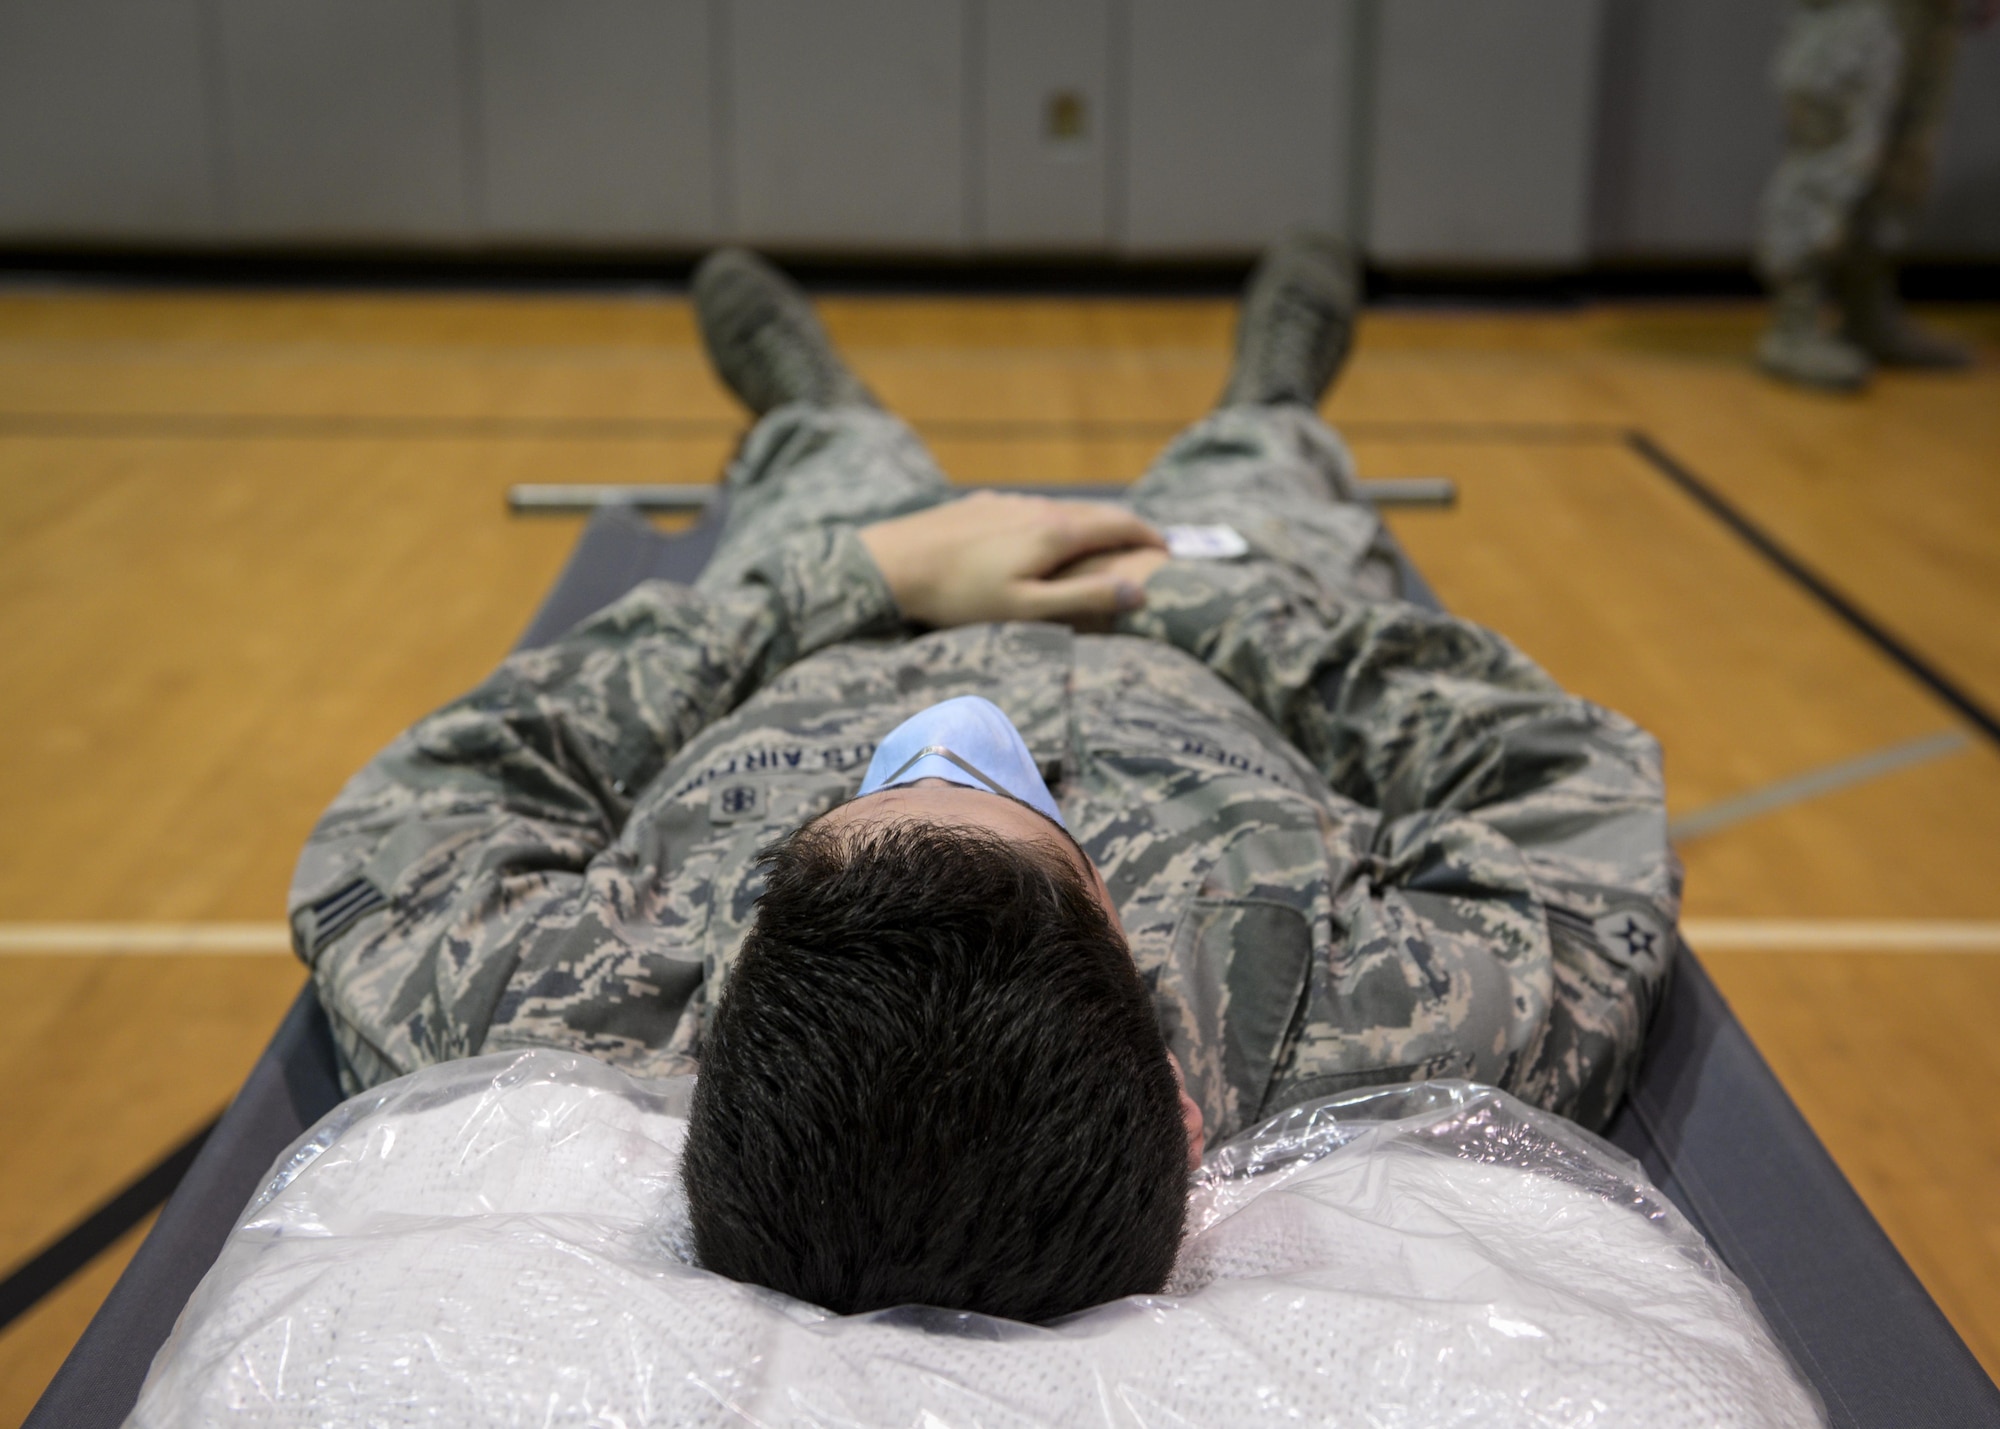 Senior Airman John Snyder, 1st Special Operations Medical Group command support staff, rests on a cot during a disease containment exercise at Hurlburt Field, Fla., Feb. 4, 2015. This exercise is an annual requirement that helps squadrons across Hurlburt to coordinate and work together to ensure they are properly trained to react to a disease on base, as well as in the community. (U.S. Air Force photo Senior Airman Meagan Schutter/Released)